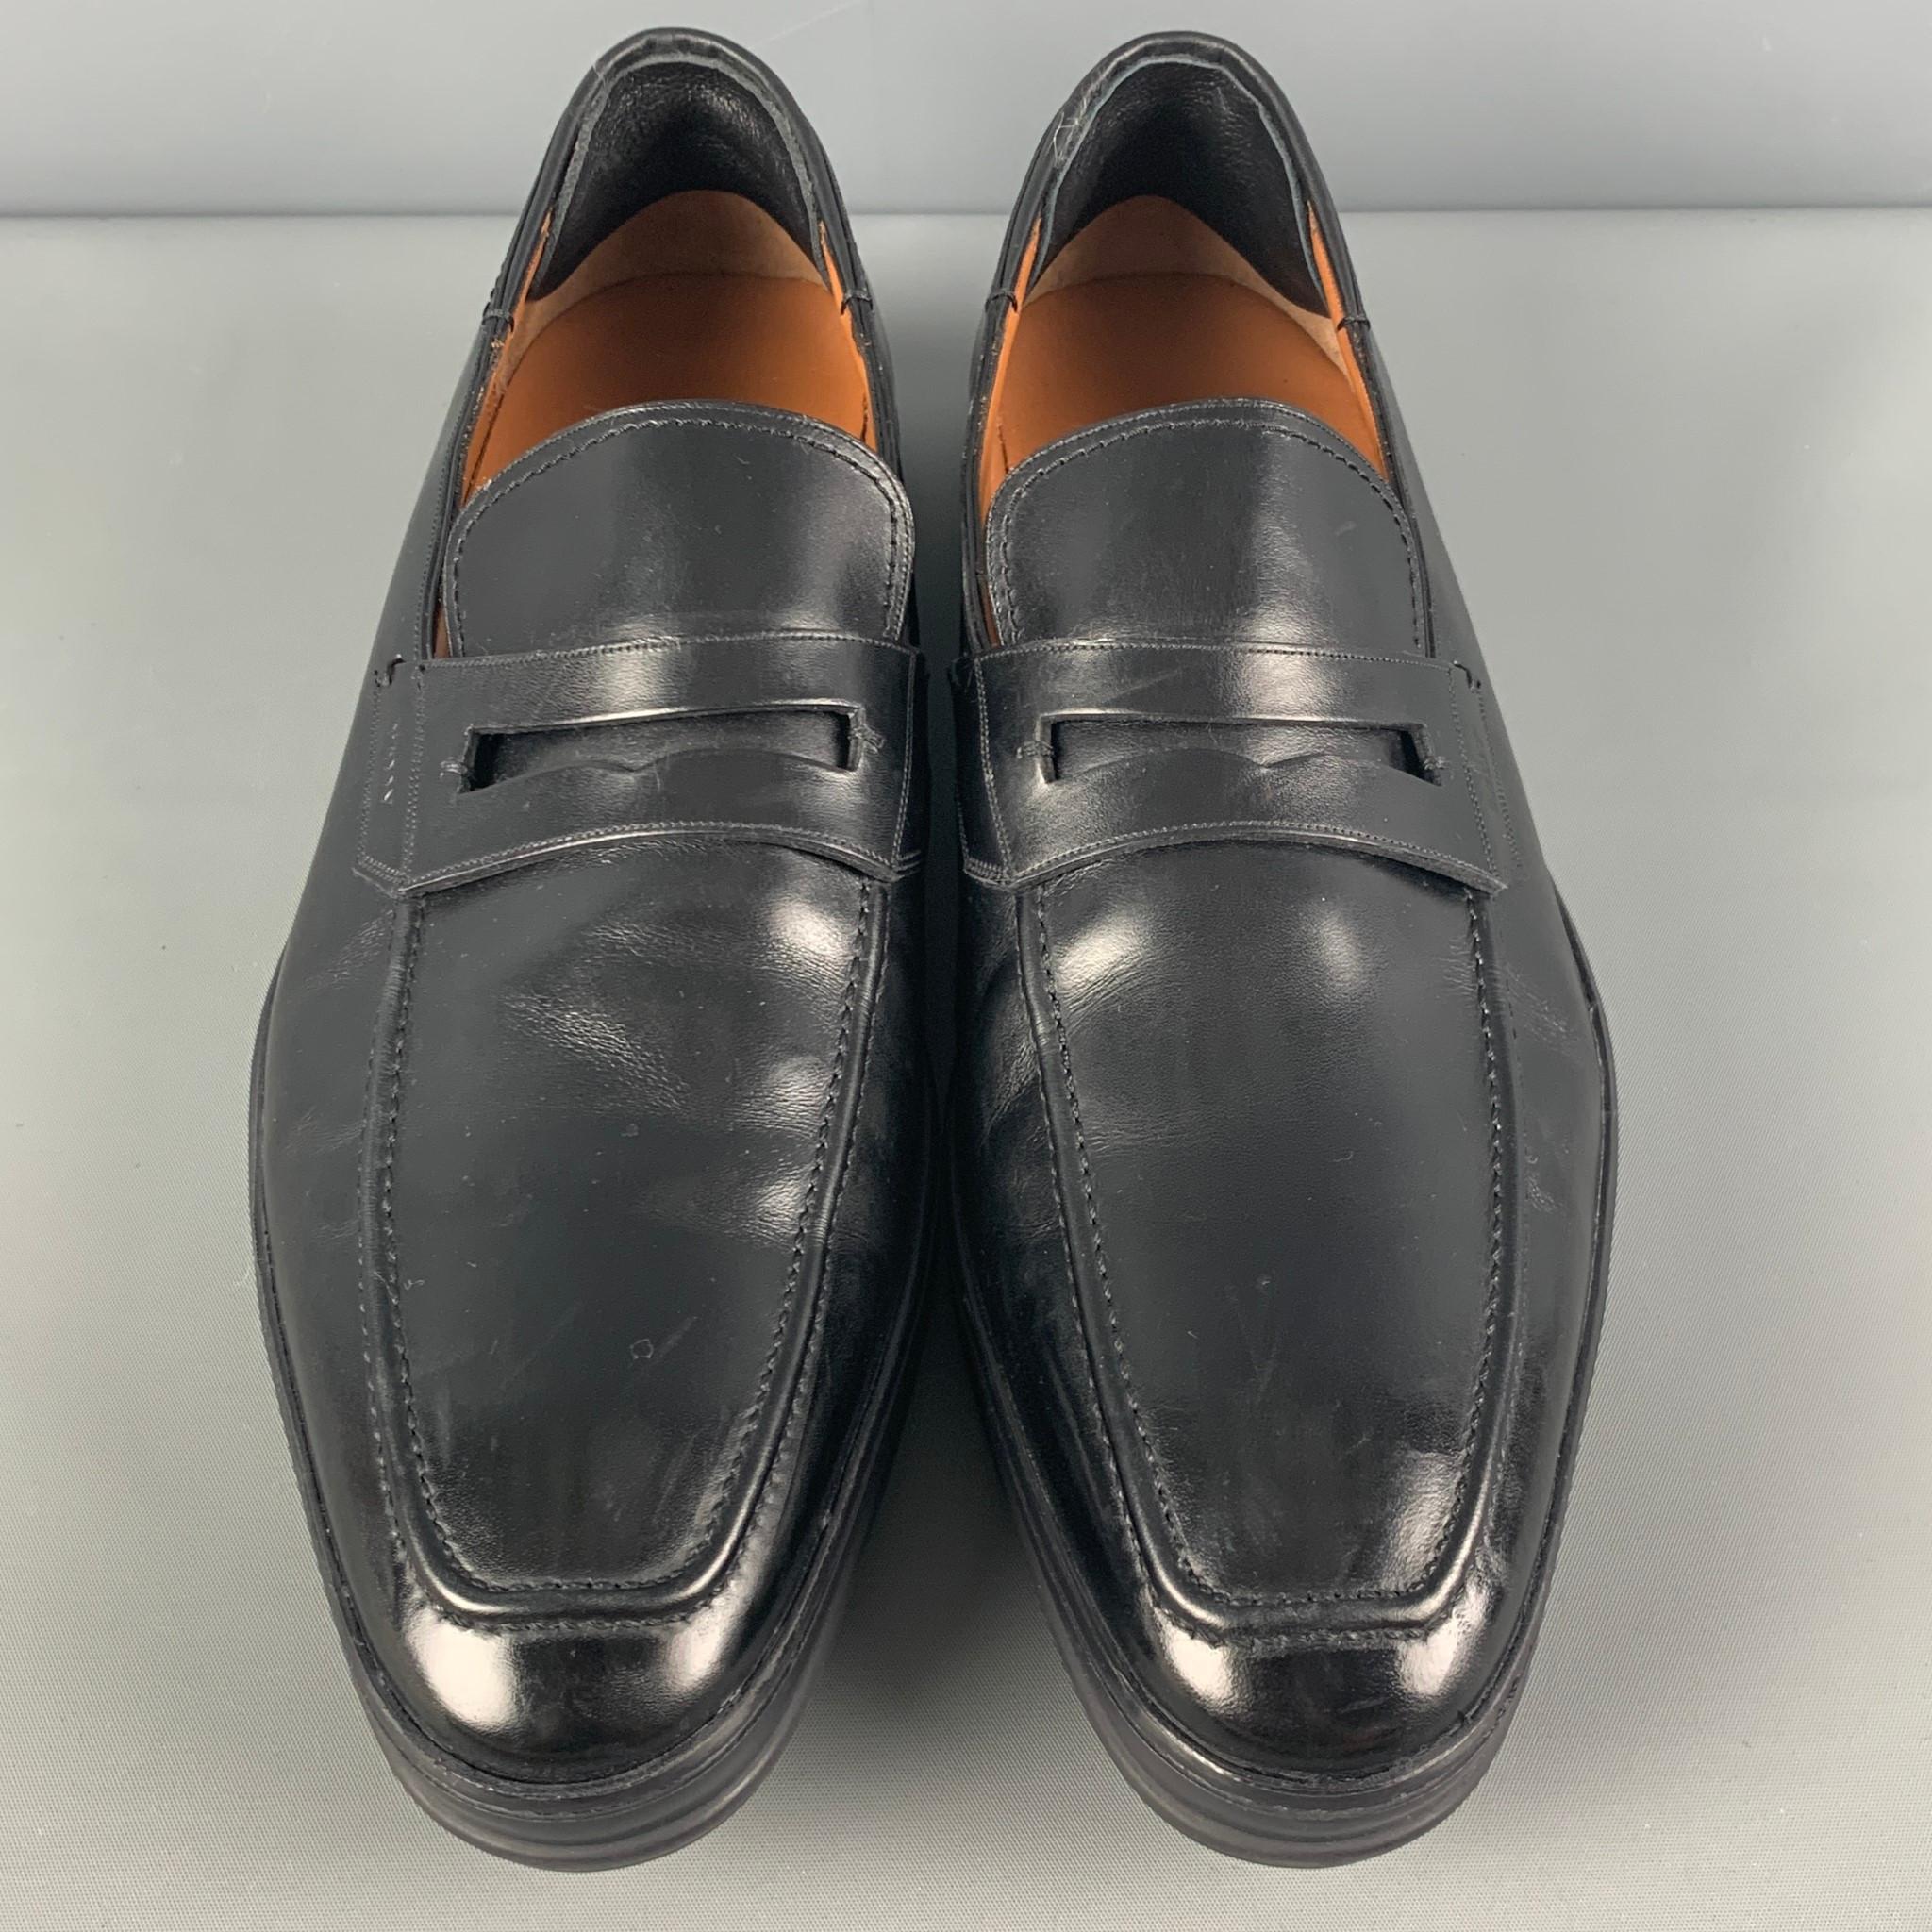 Men's BALLY Size 10 Black Leather Penny Relon Loafers